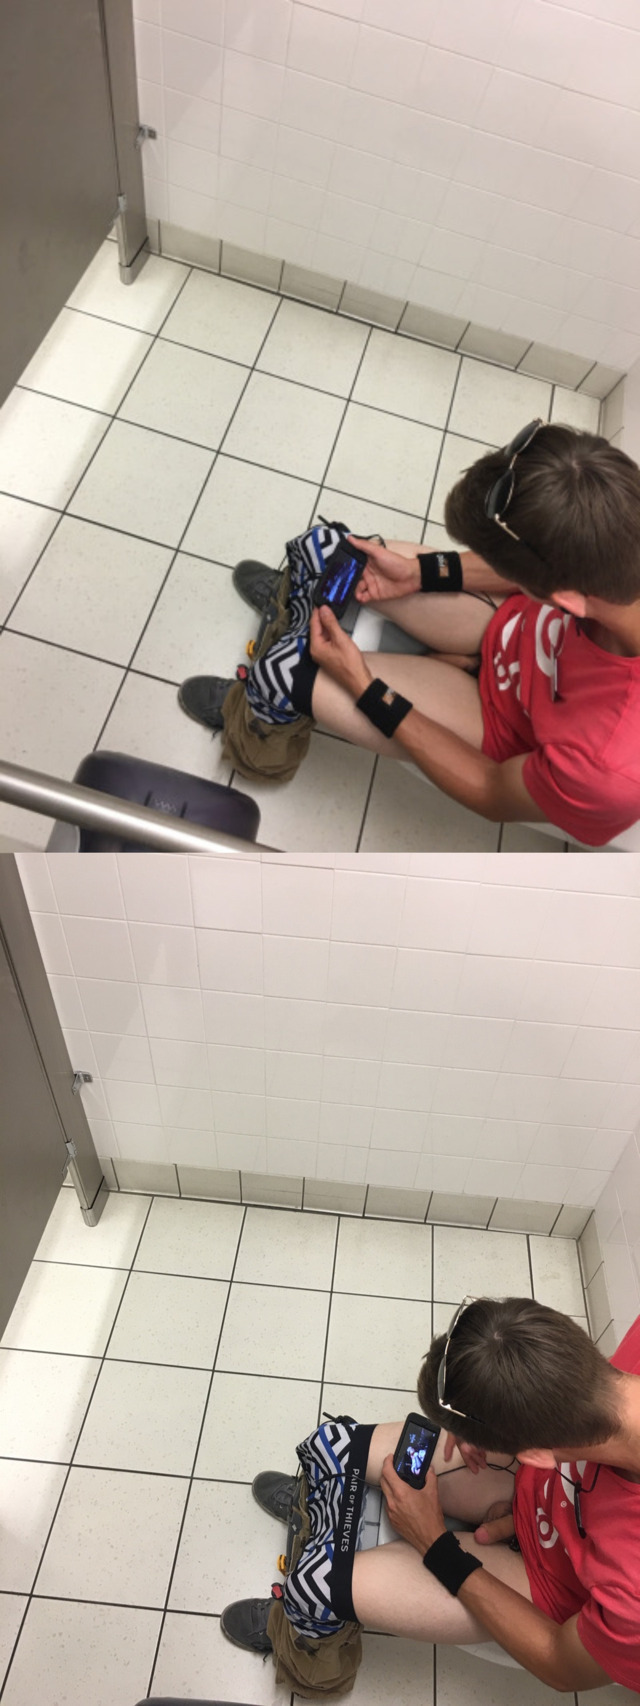 big-dick-guy-caught-on-the-bowl-public-toilet